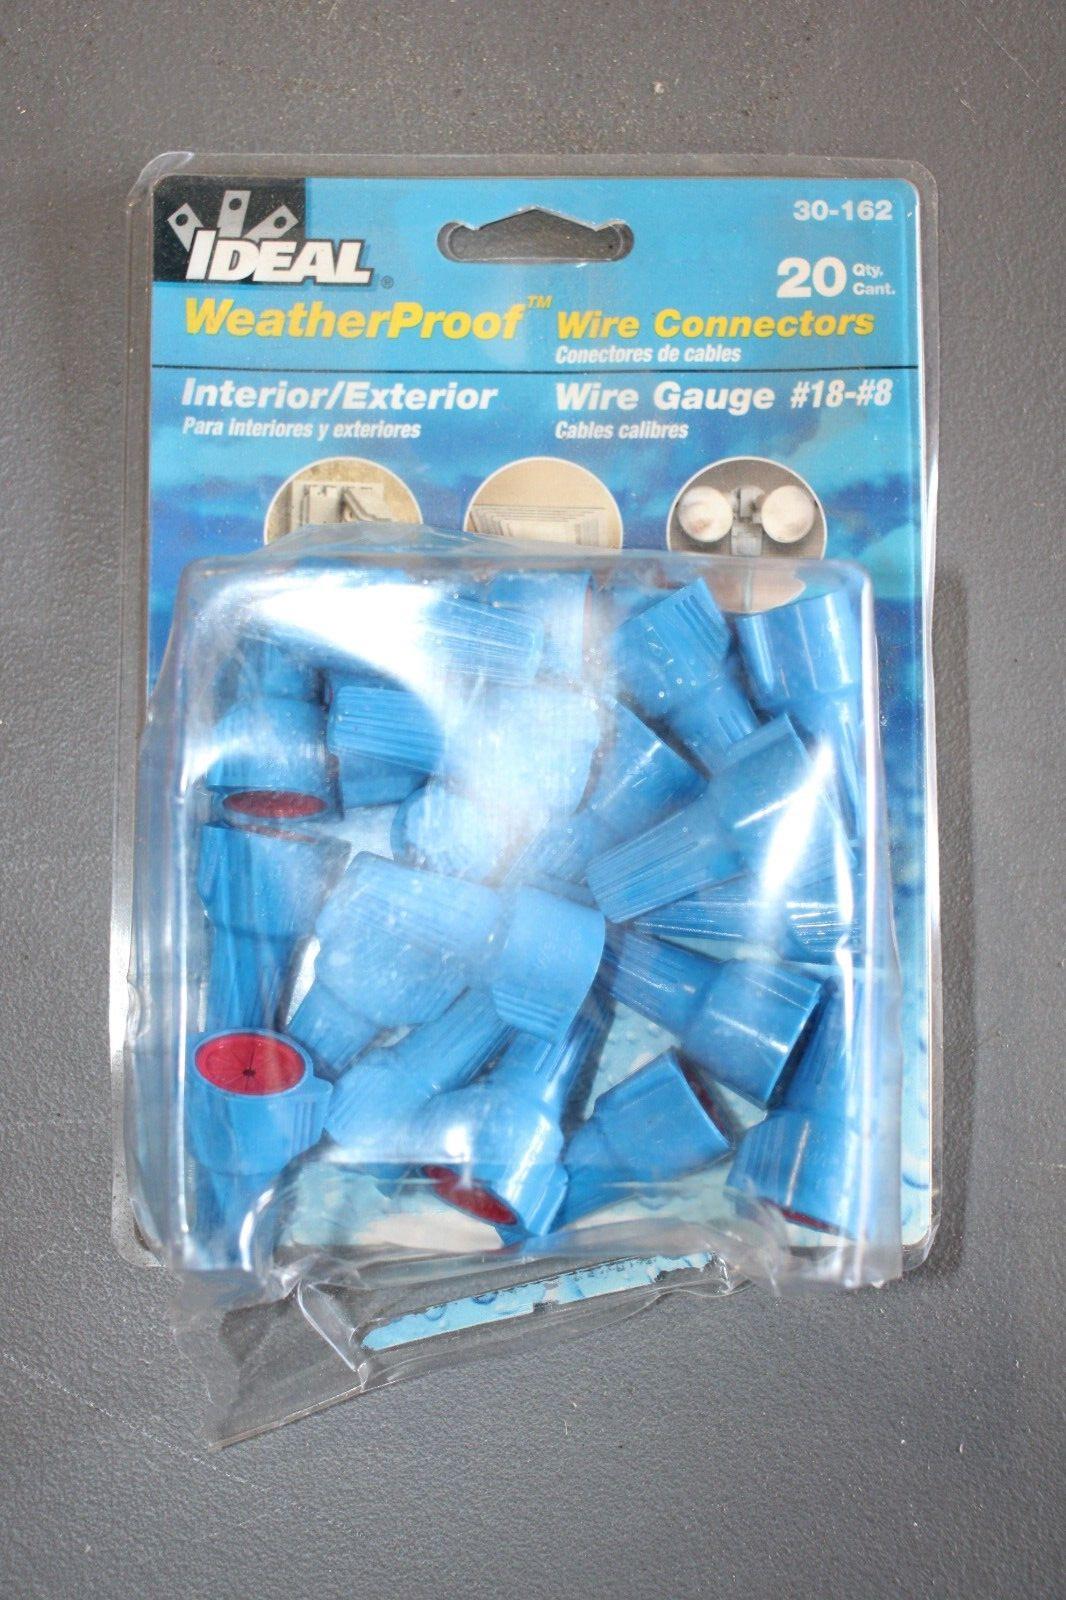 Wire Connectors Pack of 20 Ideal 30-1162 Weatherproof 18-8AWG